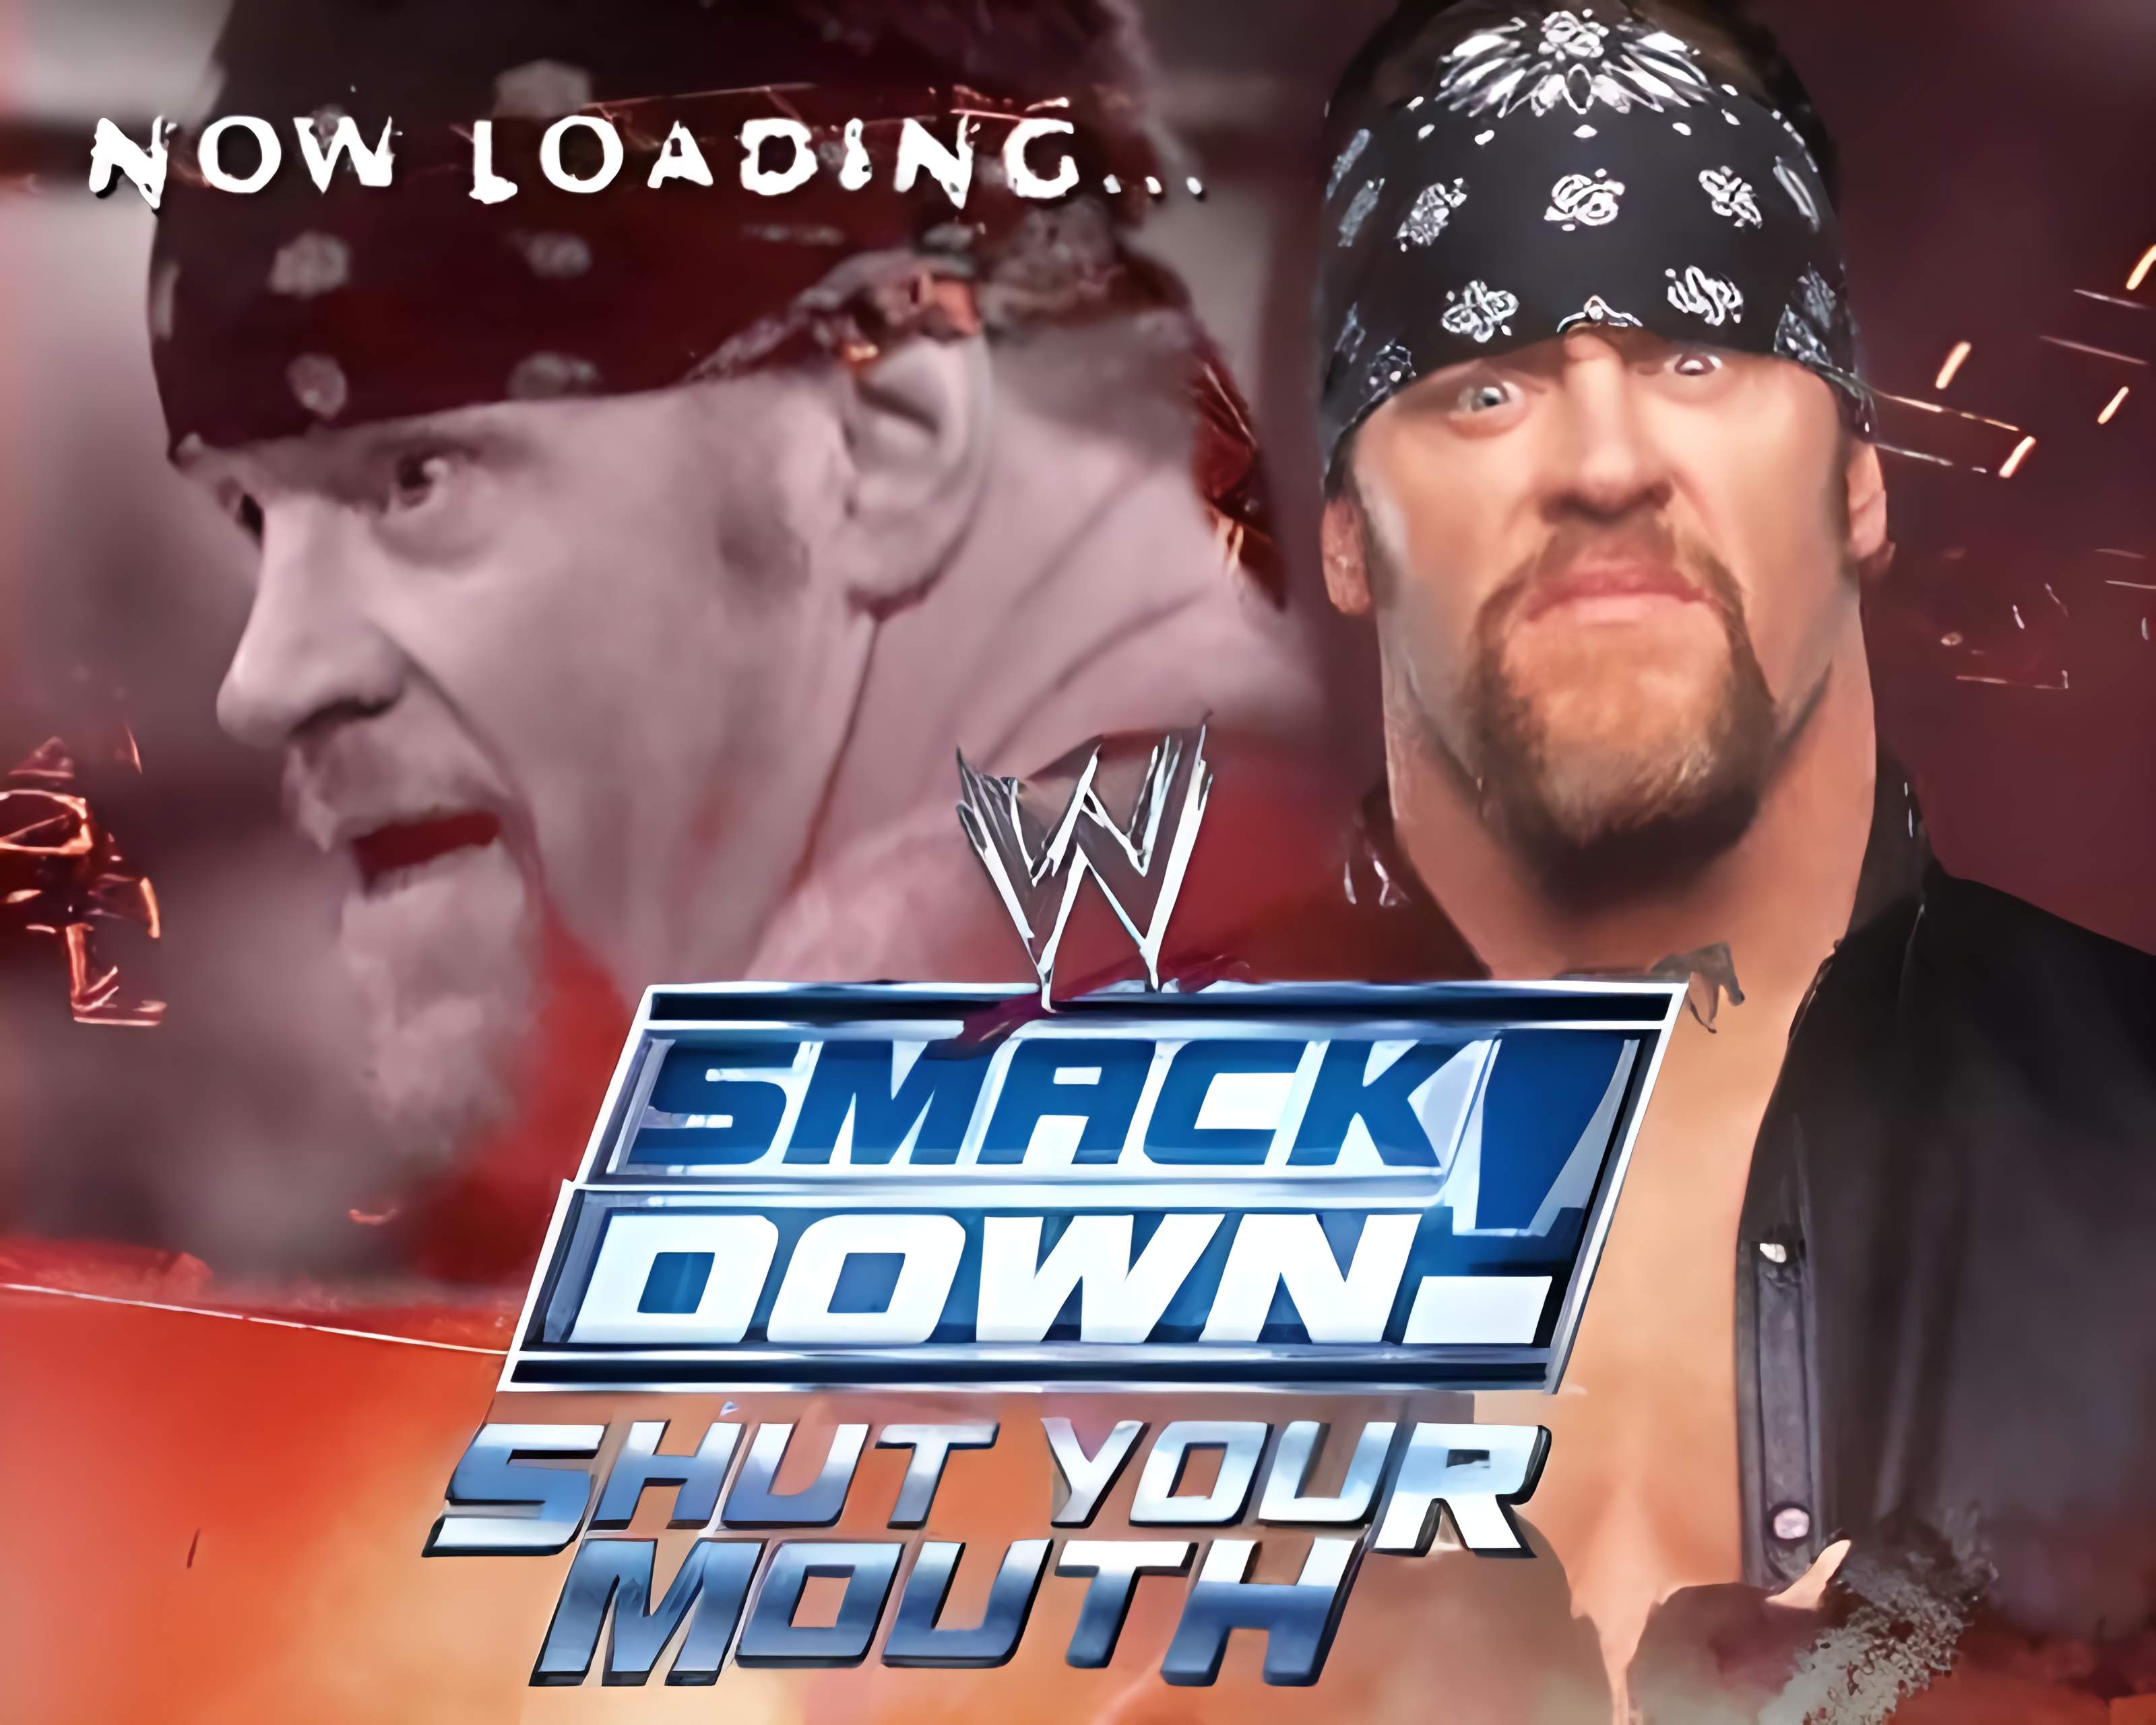 wwe-smackdown-shut-your-mouth-images-launchbox-games-database